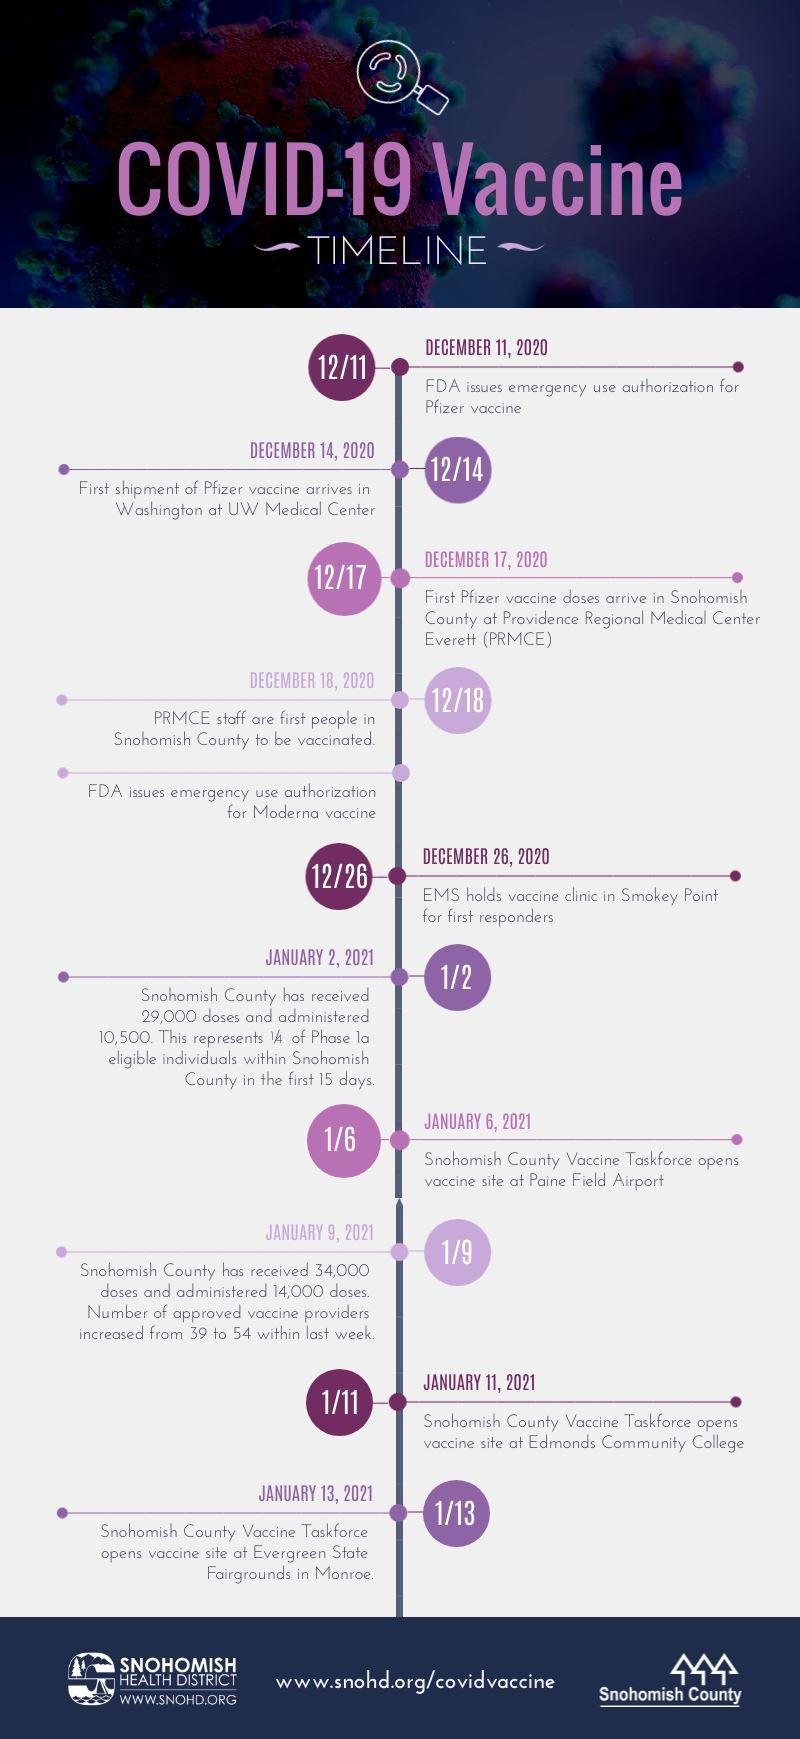 A timeline showing the progression of COVID-19 vaccination in Snohomish County